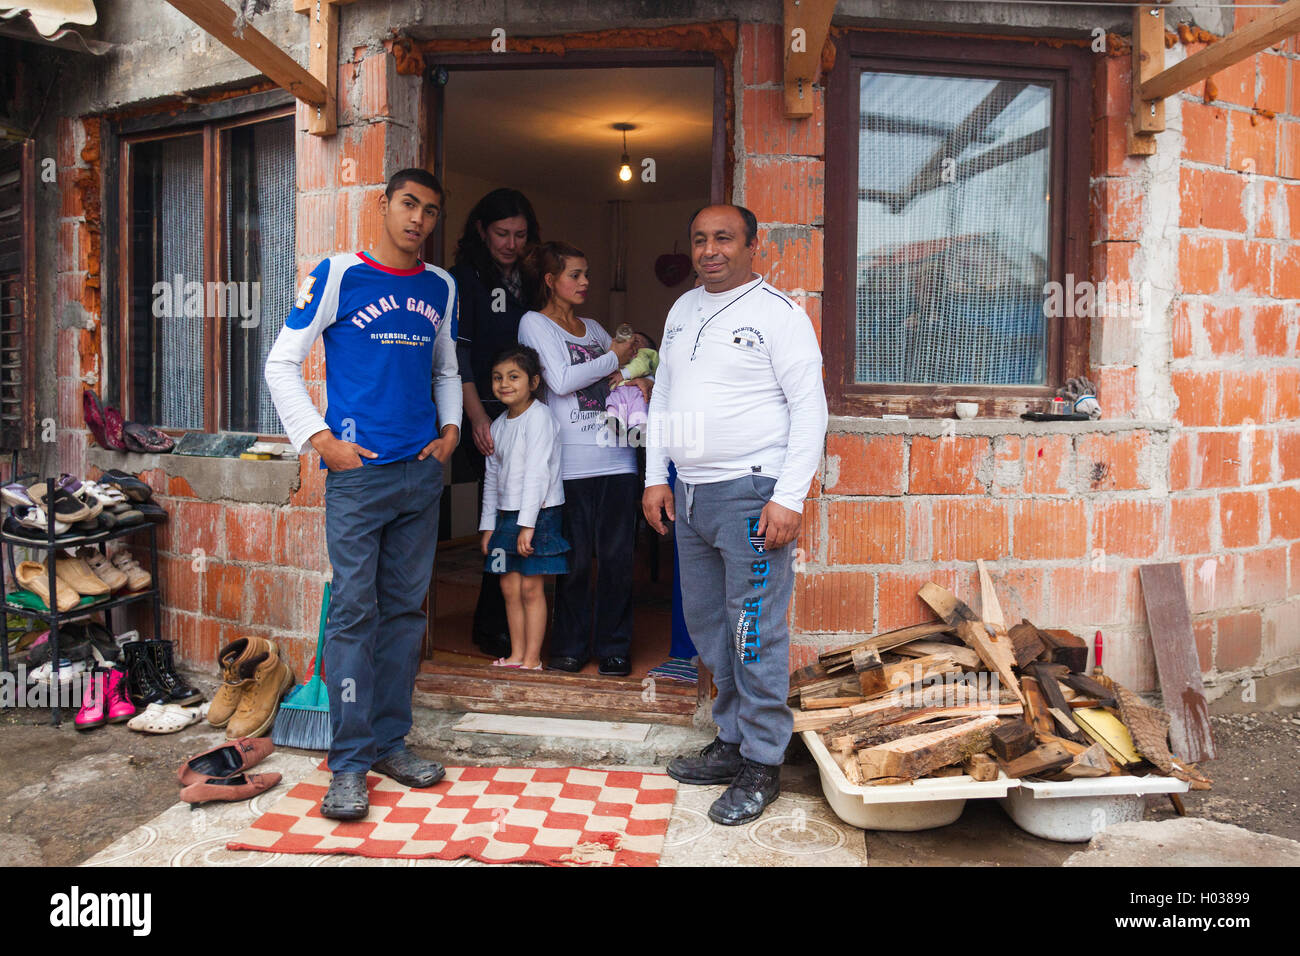 ZAGREB, CROATIA - OCTOBER 21, 2013: Roma family posing in front of their house. Stock Photo